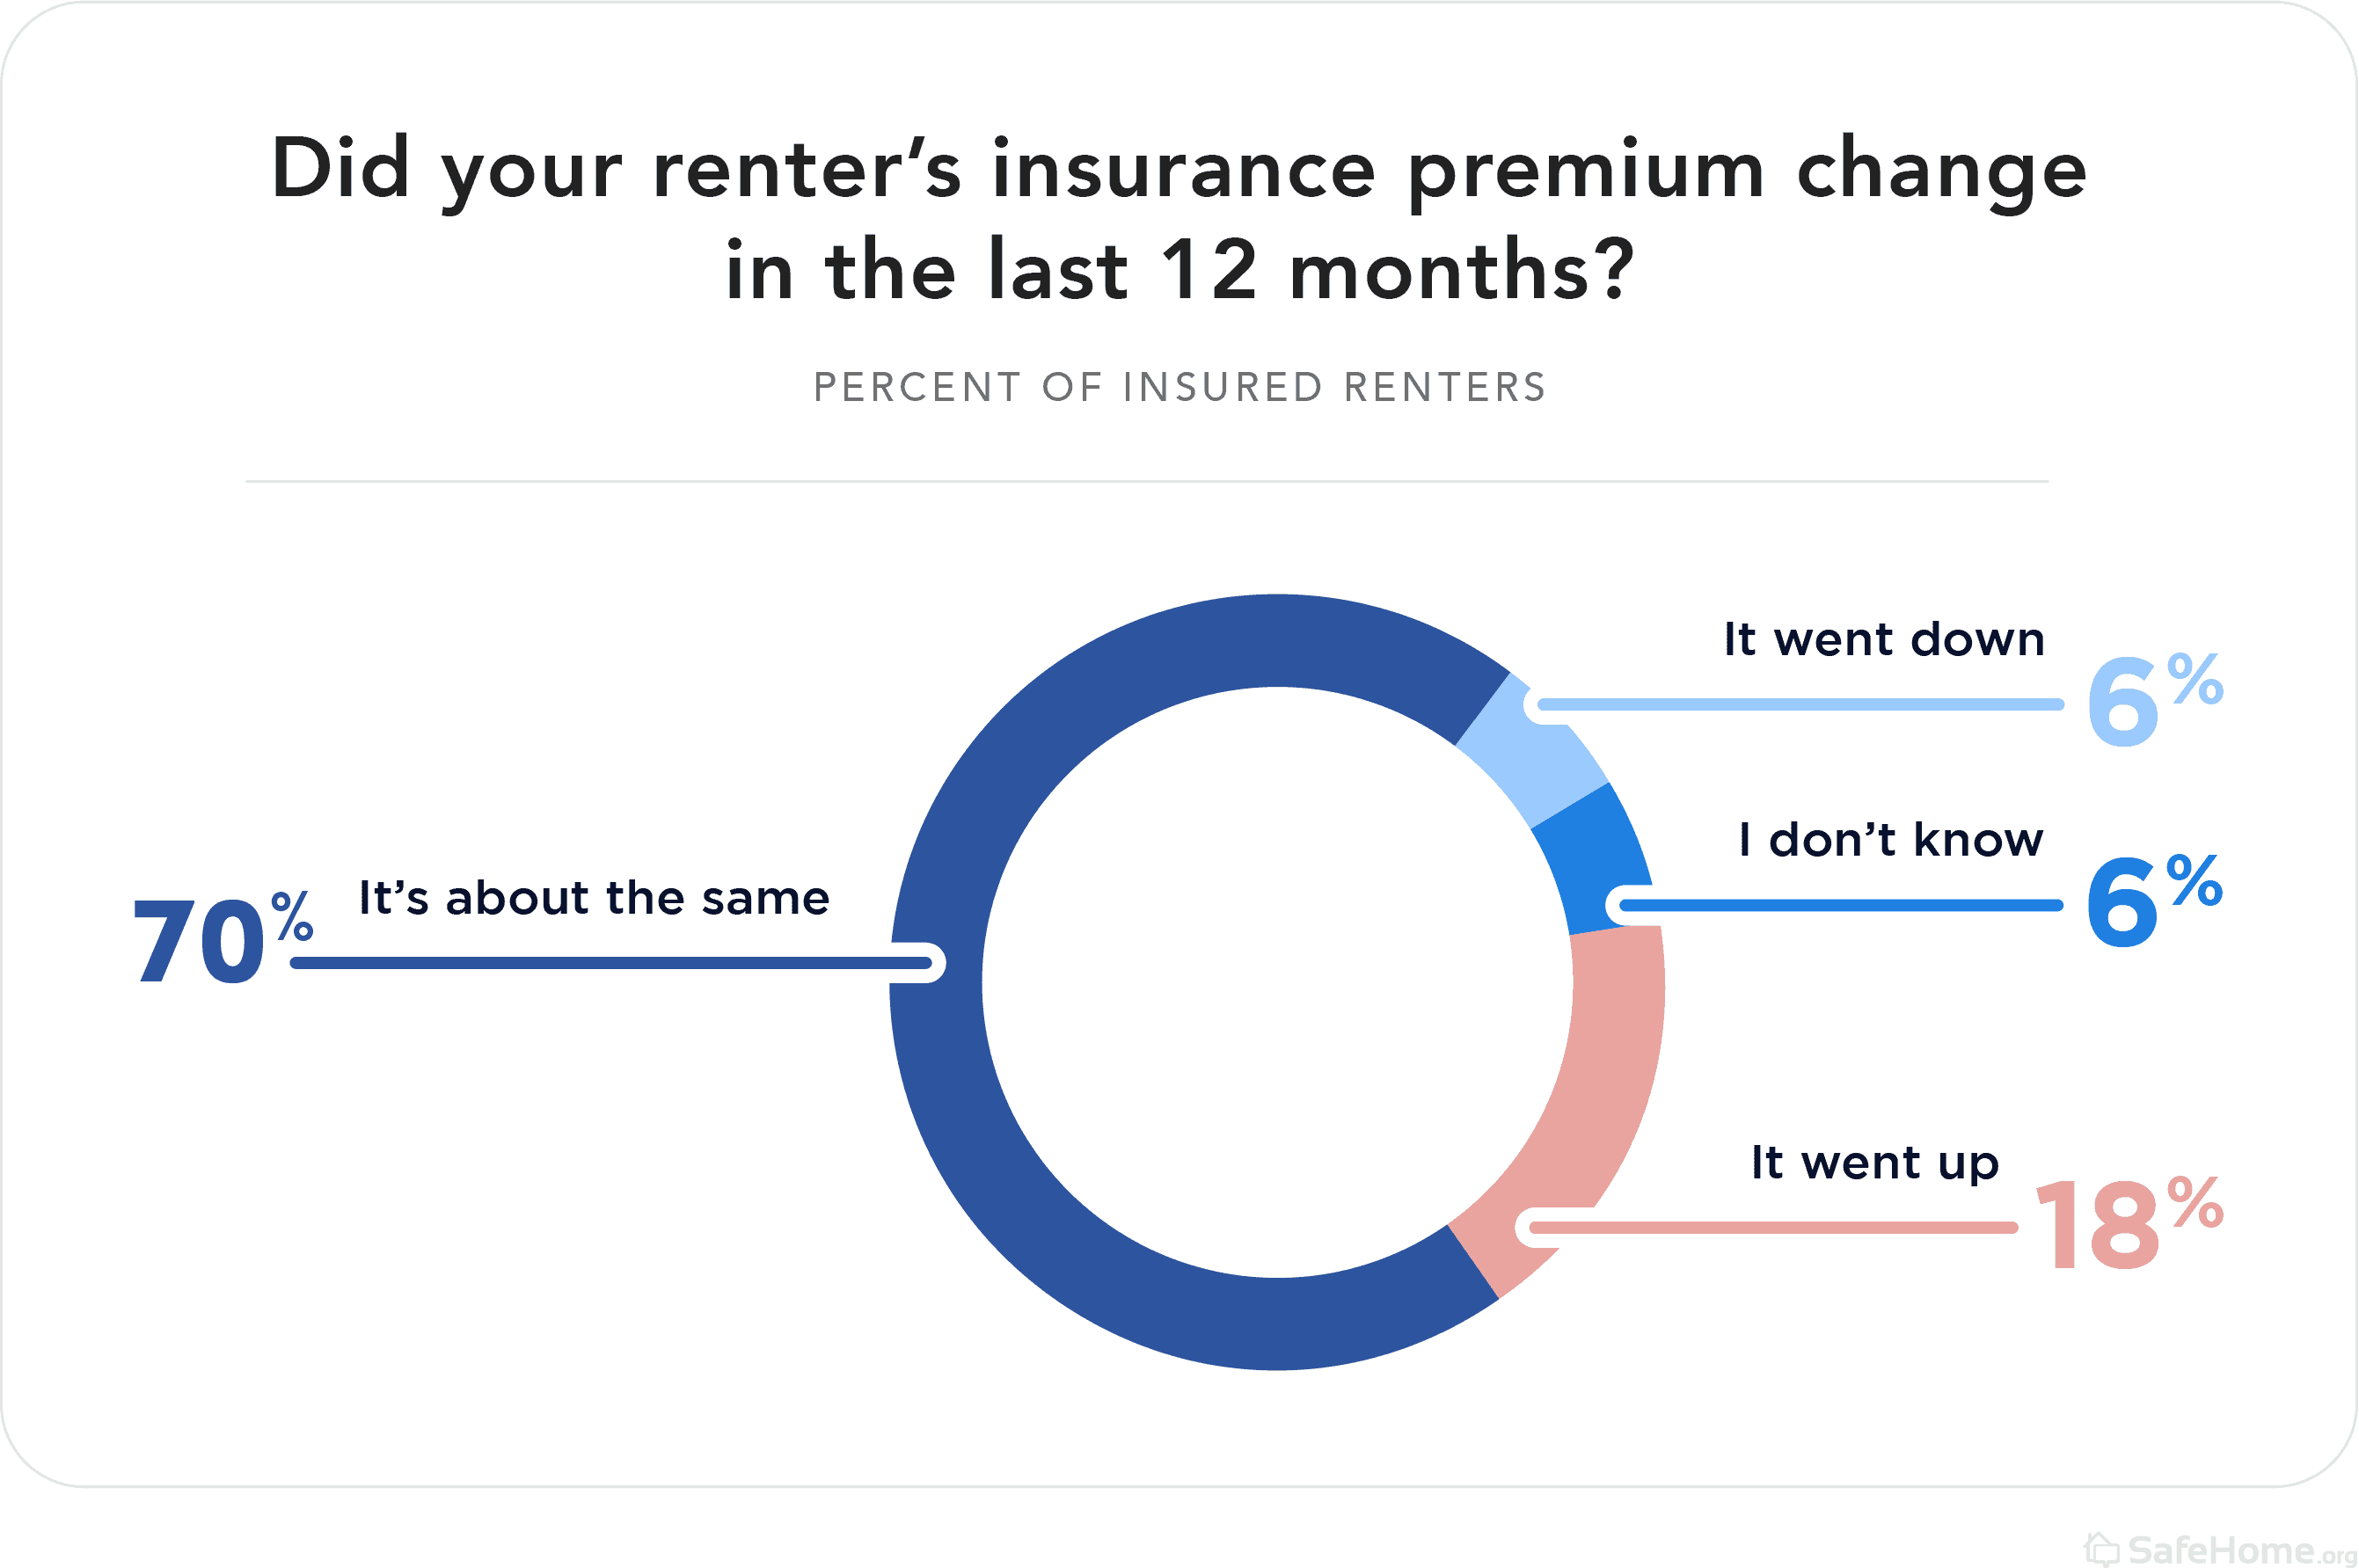 Did your renter insurance premium change in the last 12 months